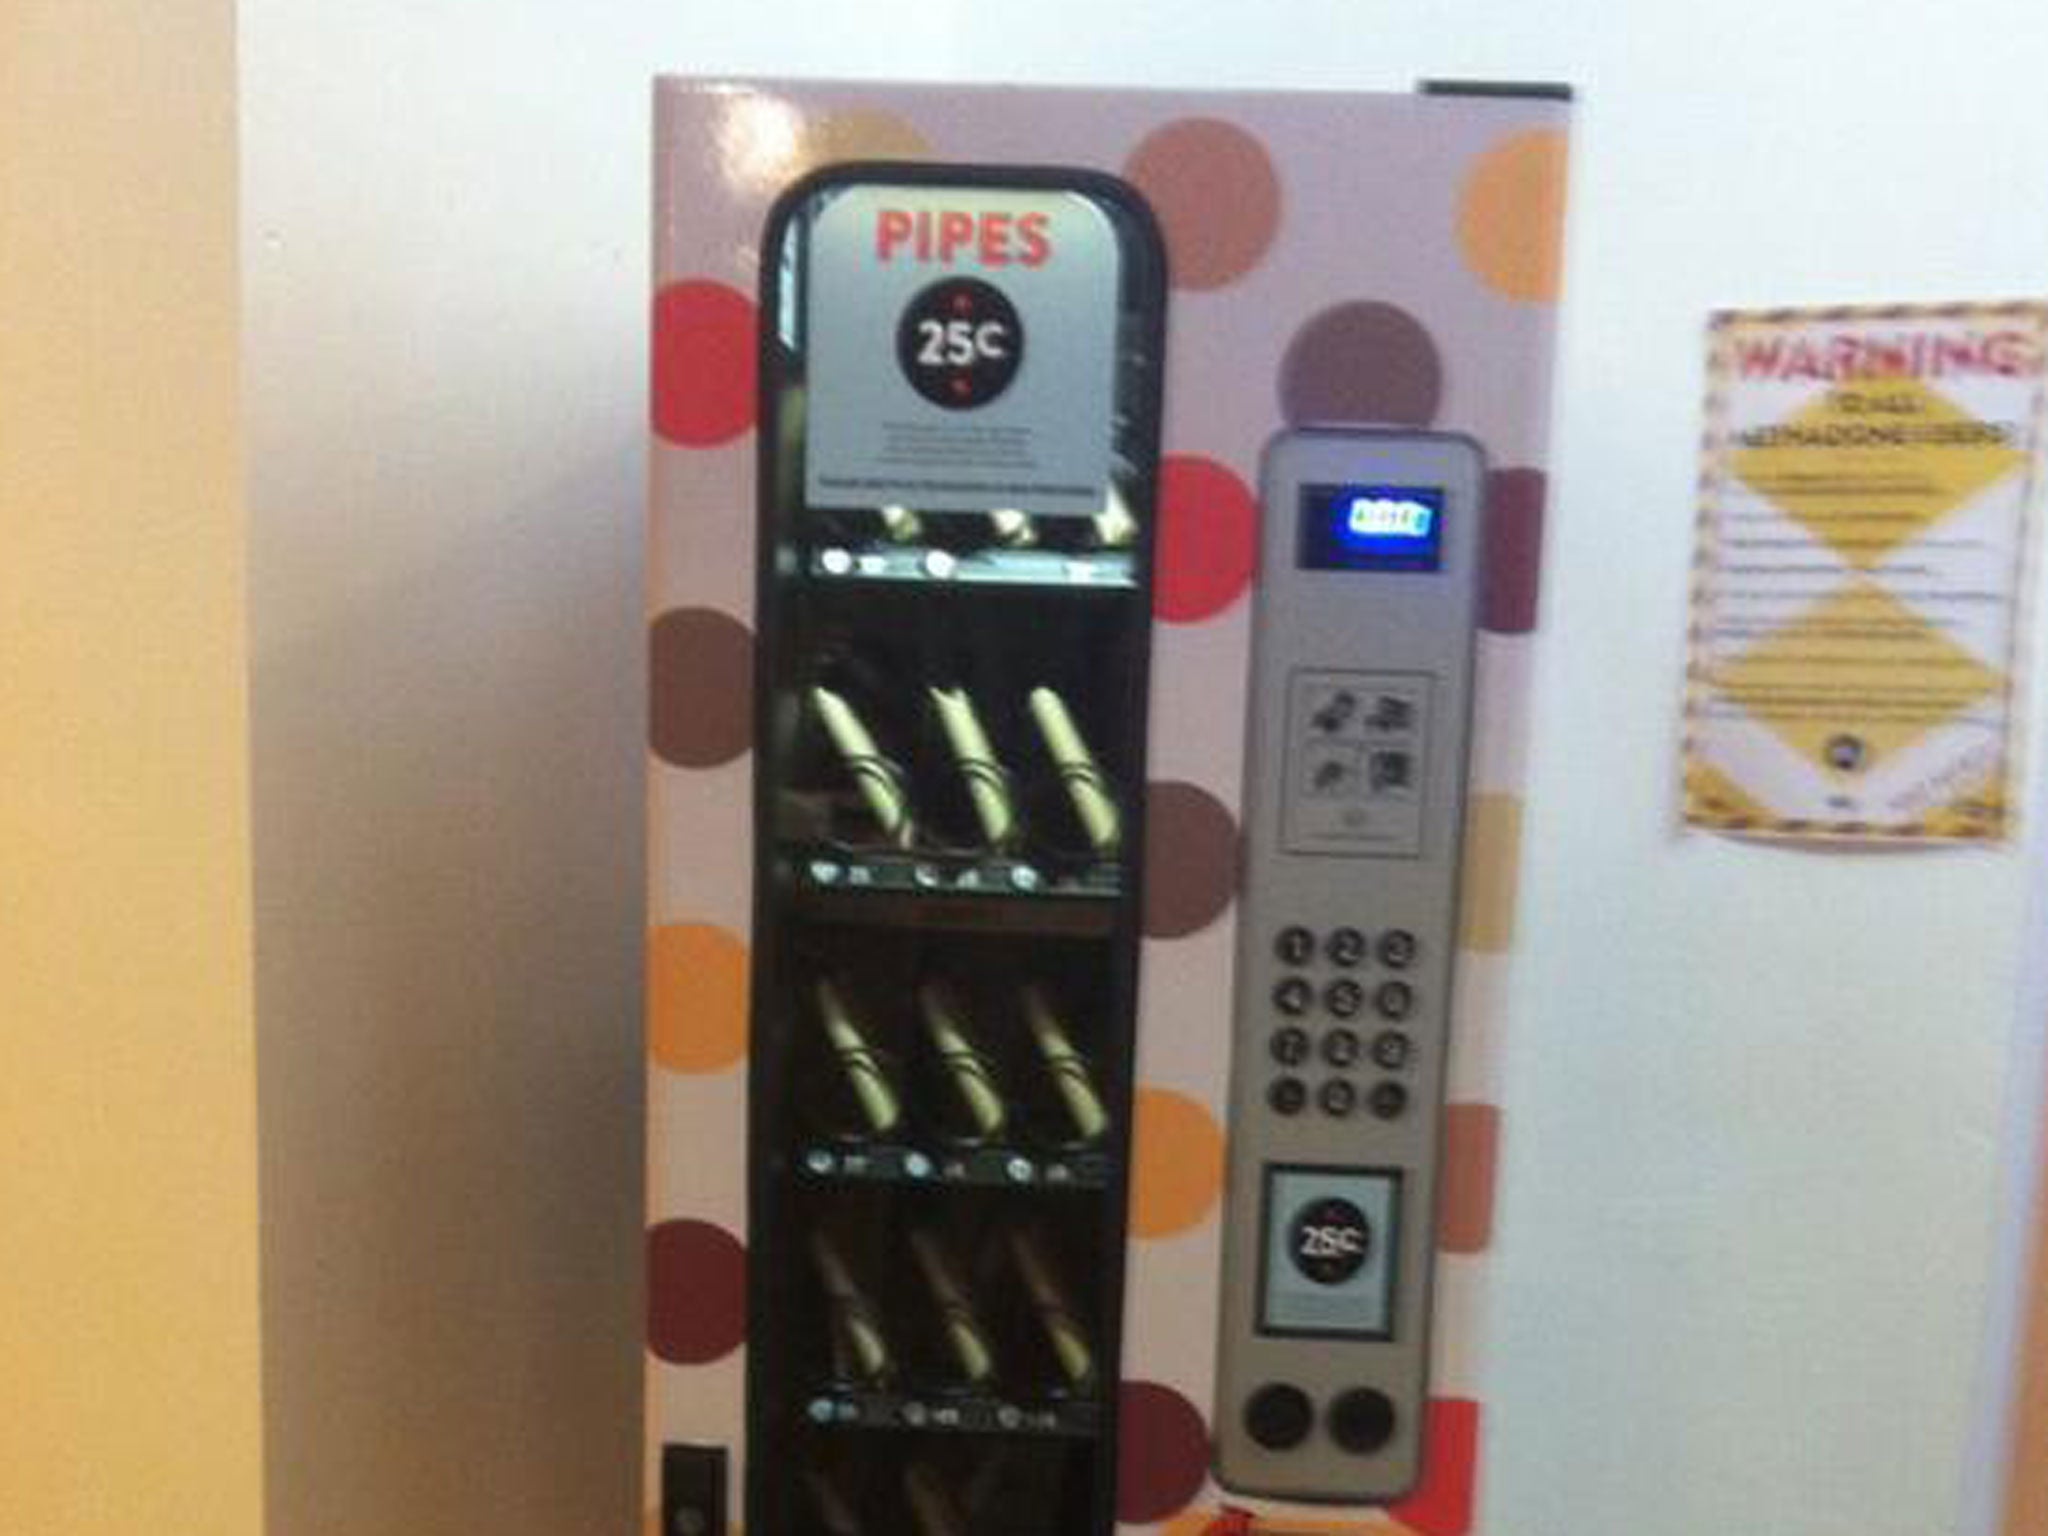 Polka dot vending machines dispense newly packaged crack pipes for $0.25 in Vancouver, Canada